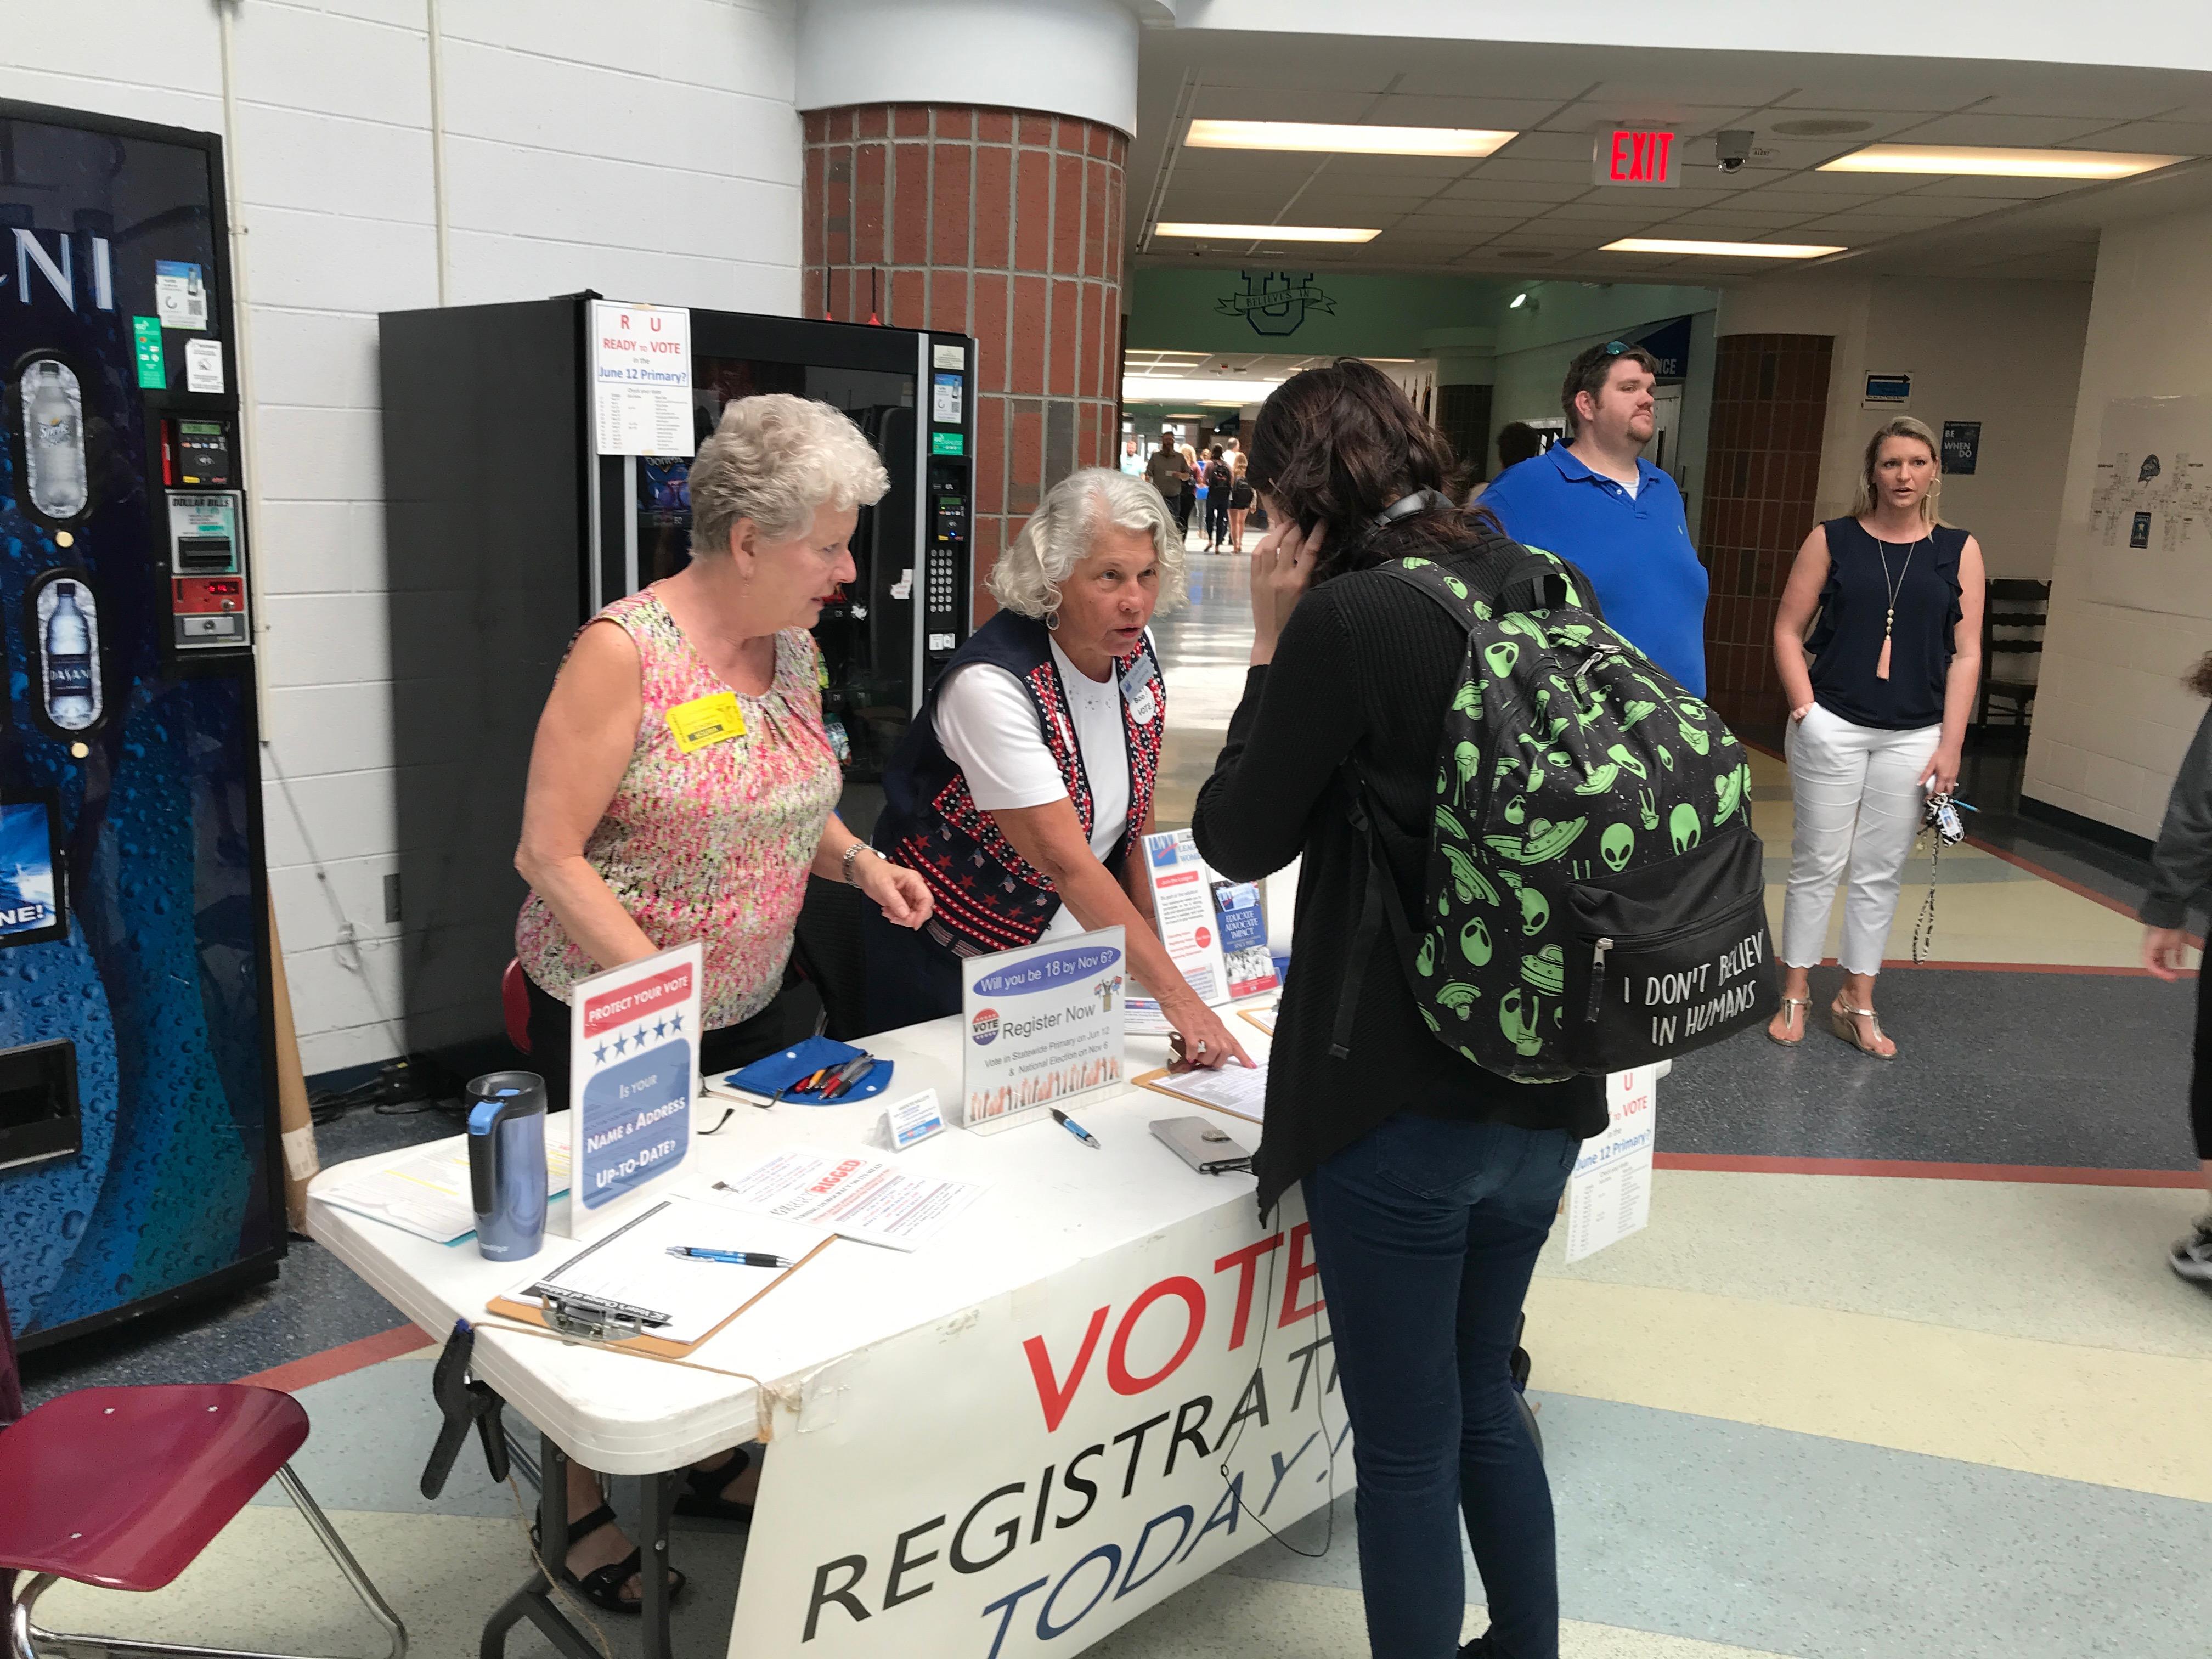 May 9 - Informing St James High School students how to register to vote